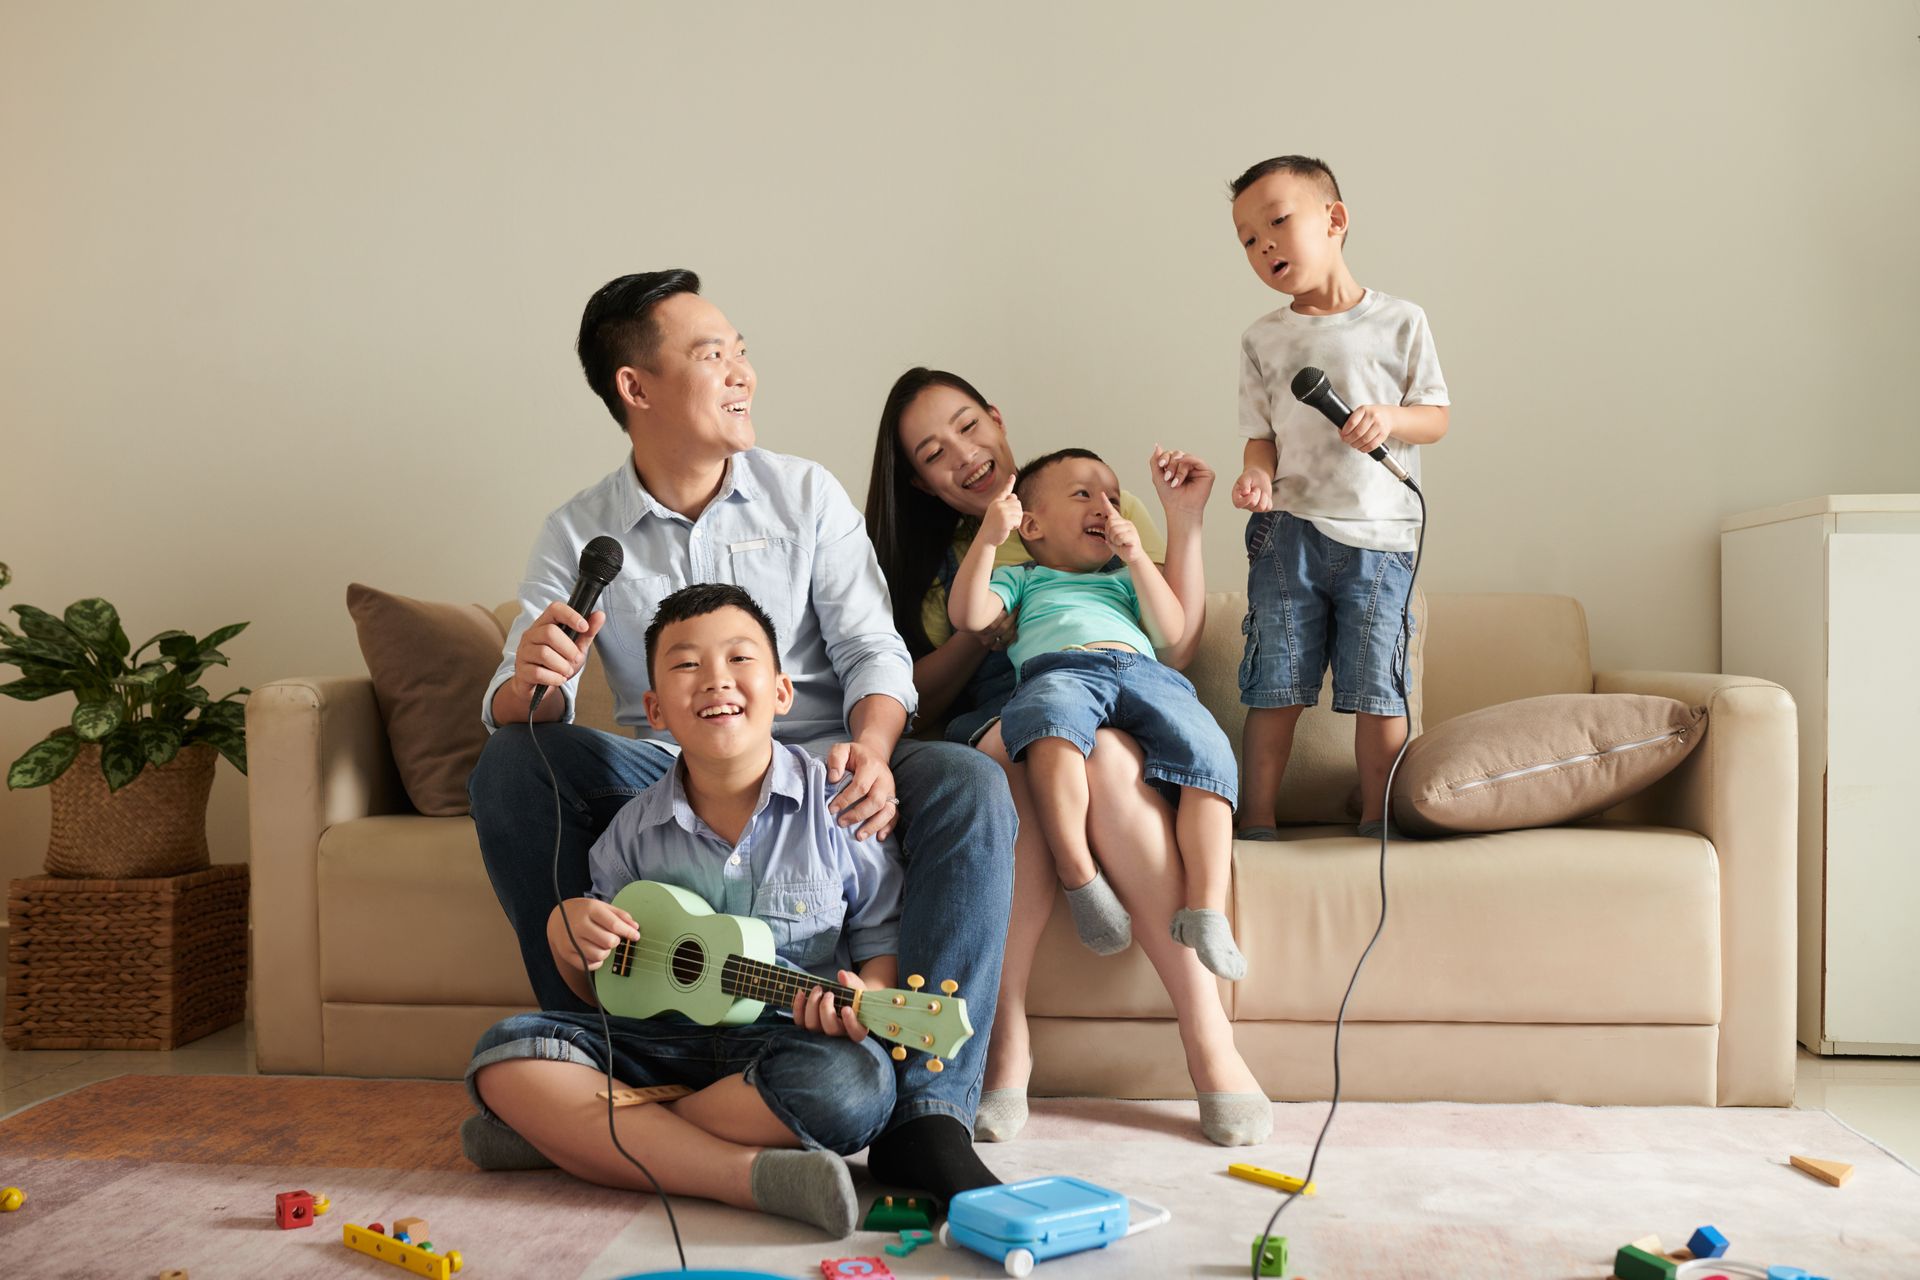 A family is sitting on a couch in a living room singing into microphones.